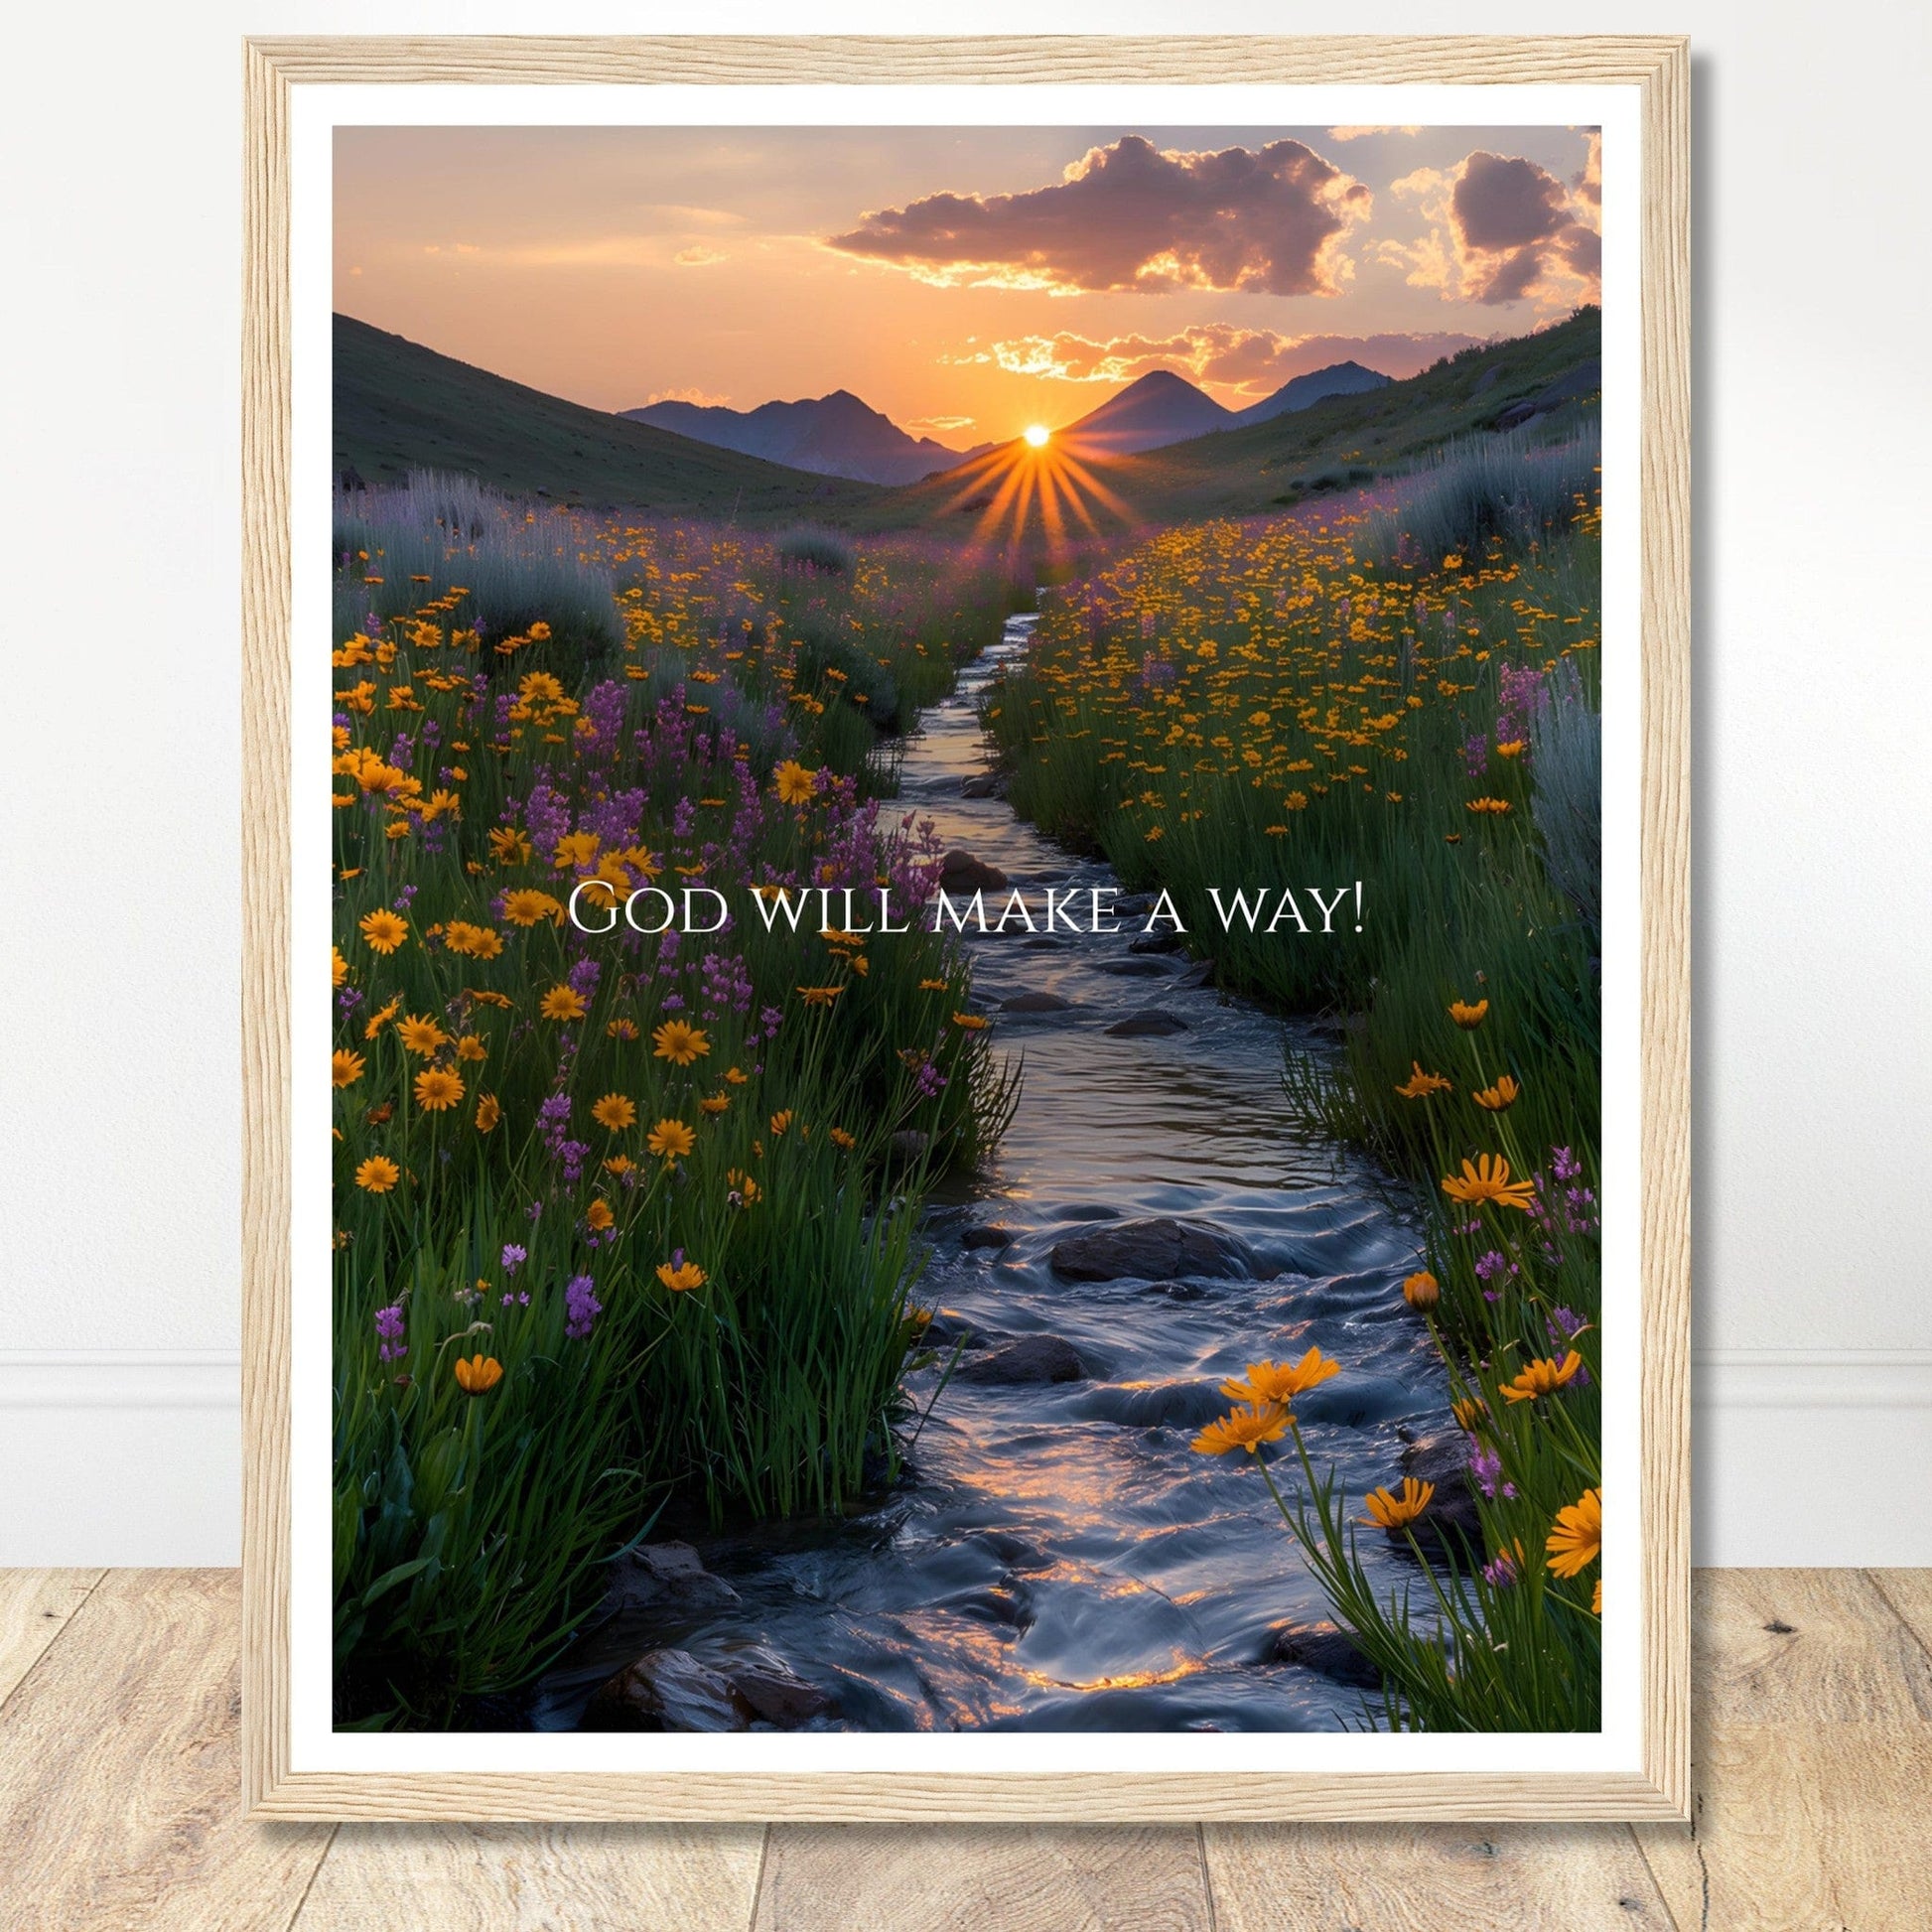 Coffee With My Father Print Material 40x50 cm / 16x20″ / Framed / Wood frame God Will Make A Way - Custom Art